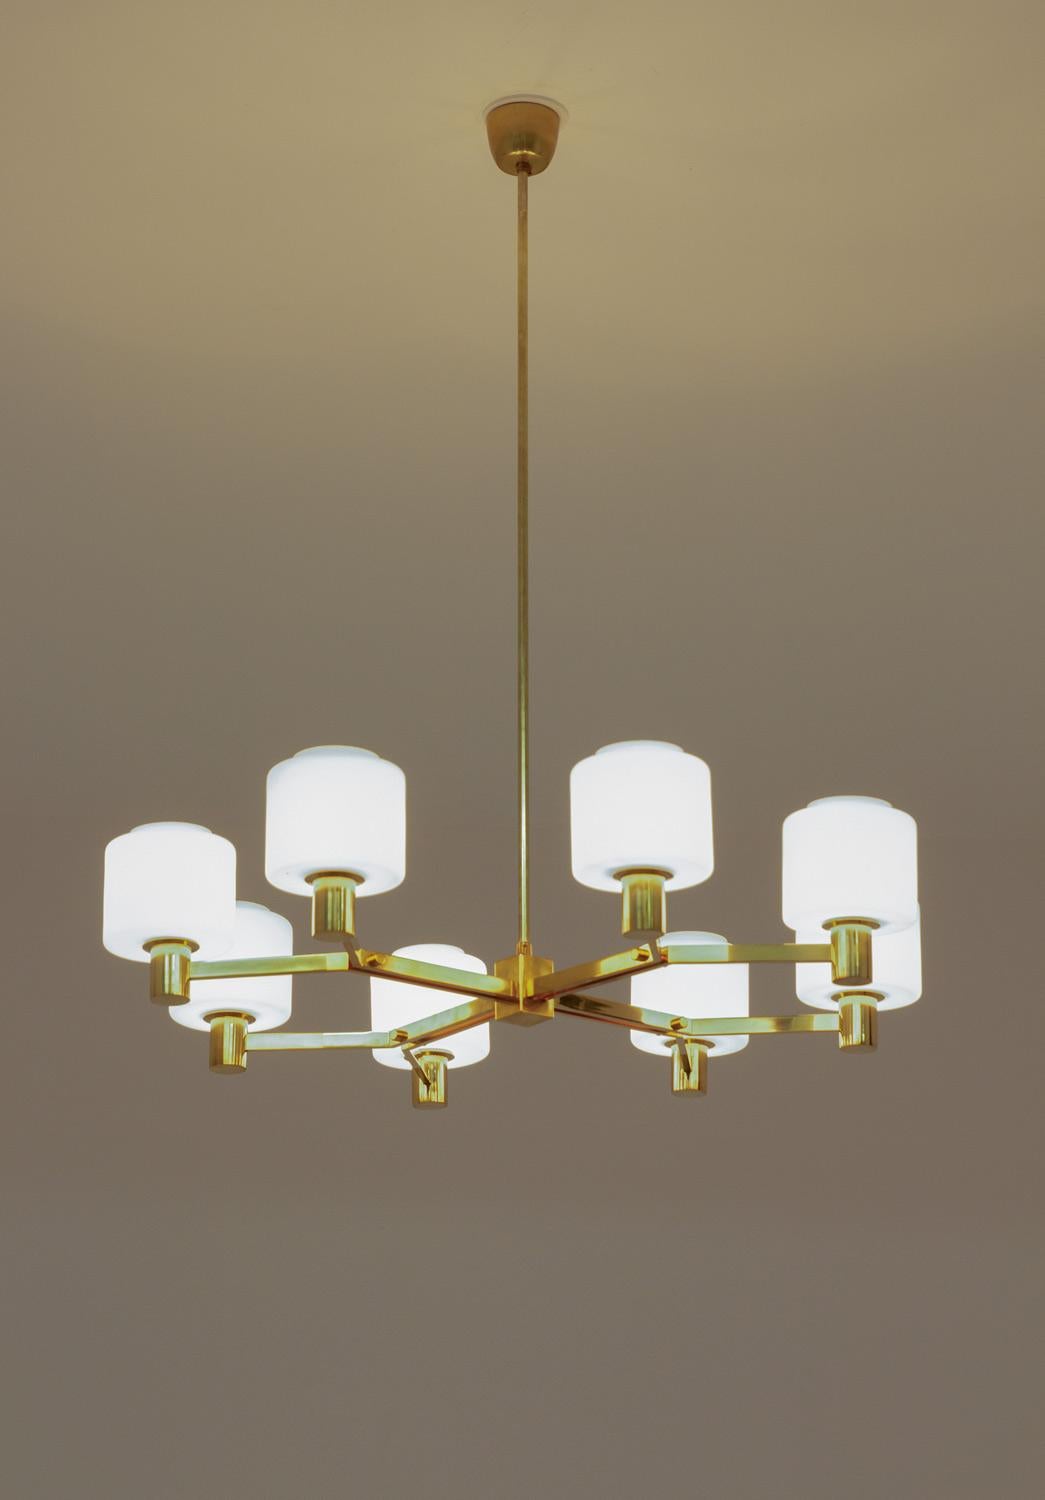 Large Scandinavian Midcentury Chandeliers in Brass and Glass For Sale 4